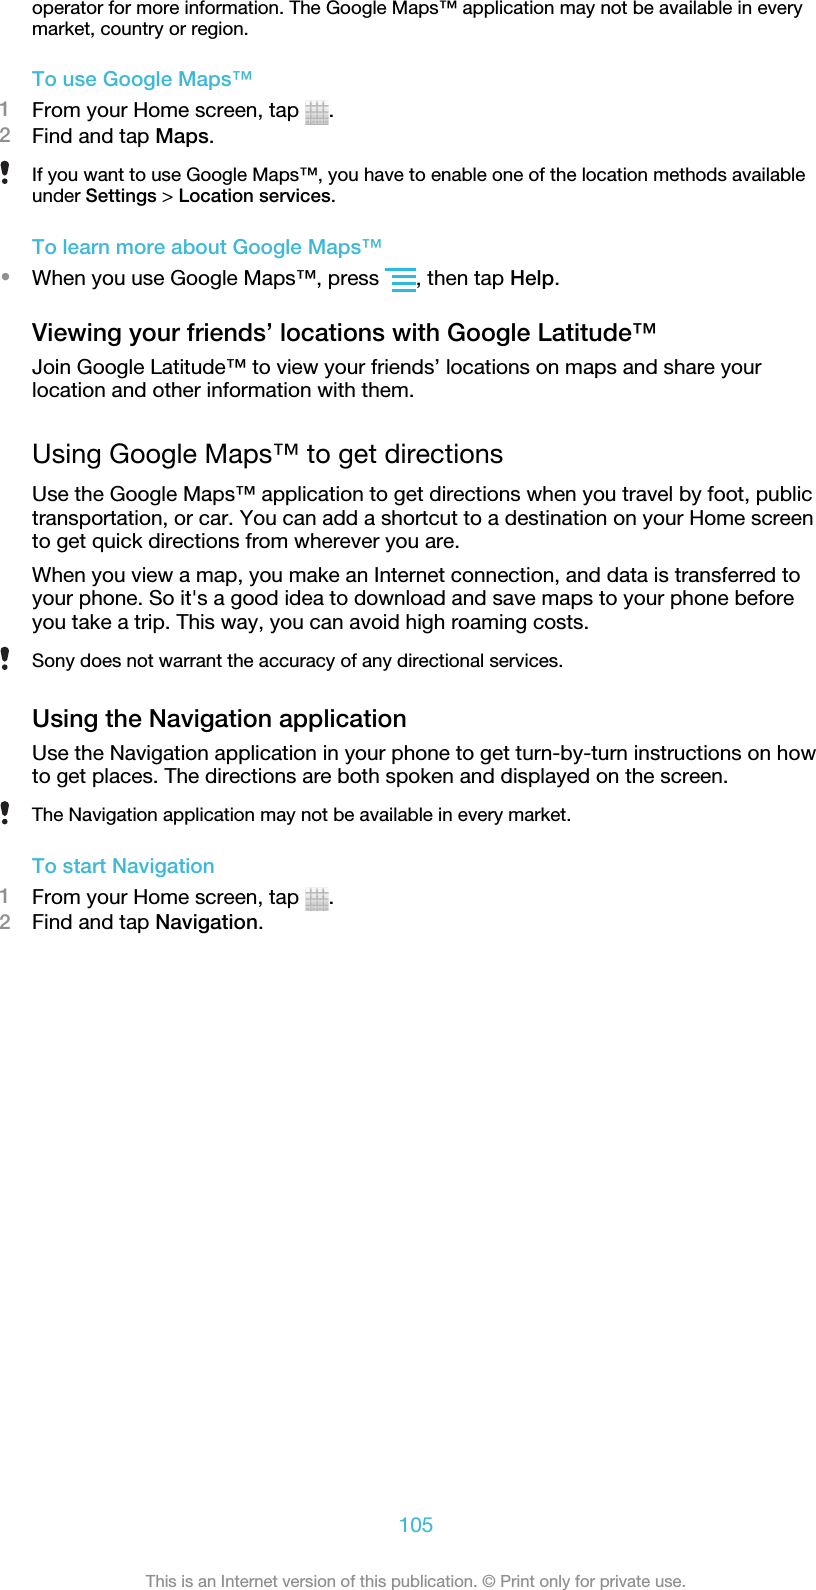 operator for more information. The Google Maps™ application may not be available in everymarket, country or region.To use Google Maps™1From your Home screen, tap  .2Find and tap Maps.If you want to use Google Maps™, you have to enable one of the location methods availableunder Settings &gt; Location services.To learn more about Google Maps™•When you use Google Maps™, press  , then tap Help.Viewing your friends’ locations with Google Latitude™Join Google Latitude™ to view your friends’ locations on maps and share yourlocation and other information with them.Using Google Maps™ to get directionsUse the Google Maps™ application to get directions when you travel by foot, publictransportation, or car. You can add a shortcut to a destination on your Home screento get quick directions from wherever you are.When you view a map, you make an Internet connection, and data is transferred toyour phone. So it&apos;s a good idea to download and save maps to your phone beforeyou take a trip. This way, you can avoid high roaming costs.Sony does not warrant the accuracy of any directional services.Using the Navigation applicationUse the Navigation application in your phone to get turn-by-turn instructions on howto get places. The directions are both spoken and displayed on the screen.The Navigation application may not be available in every market.To start Navigation1From your Home screen, tap  .2Find and tap Navigation.105This is an Internet version of this publication. © Print only for private use.